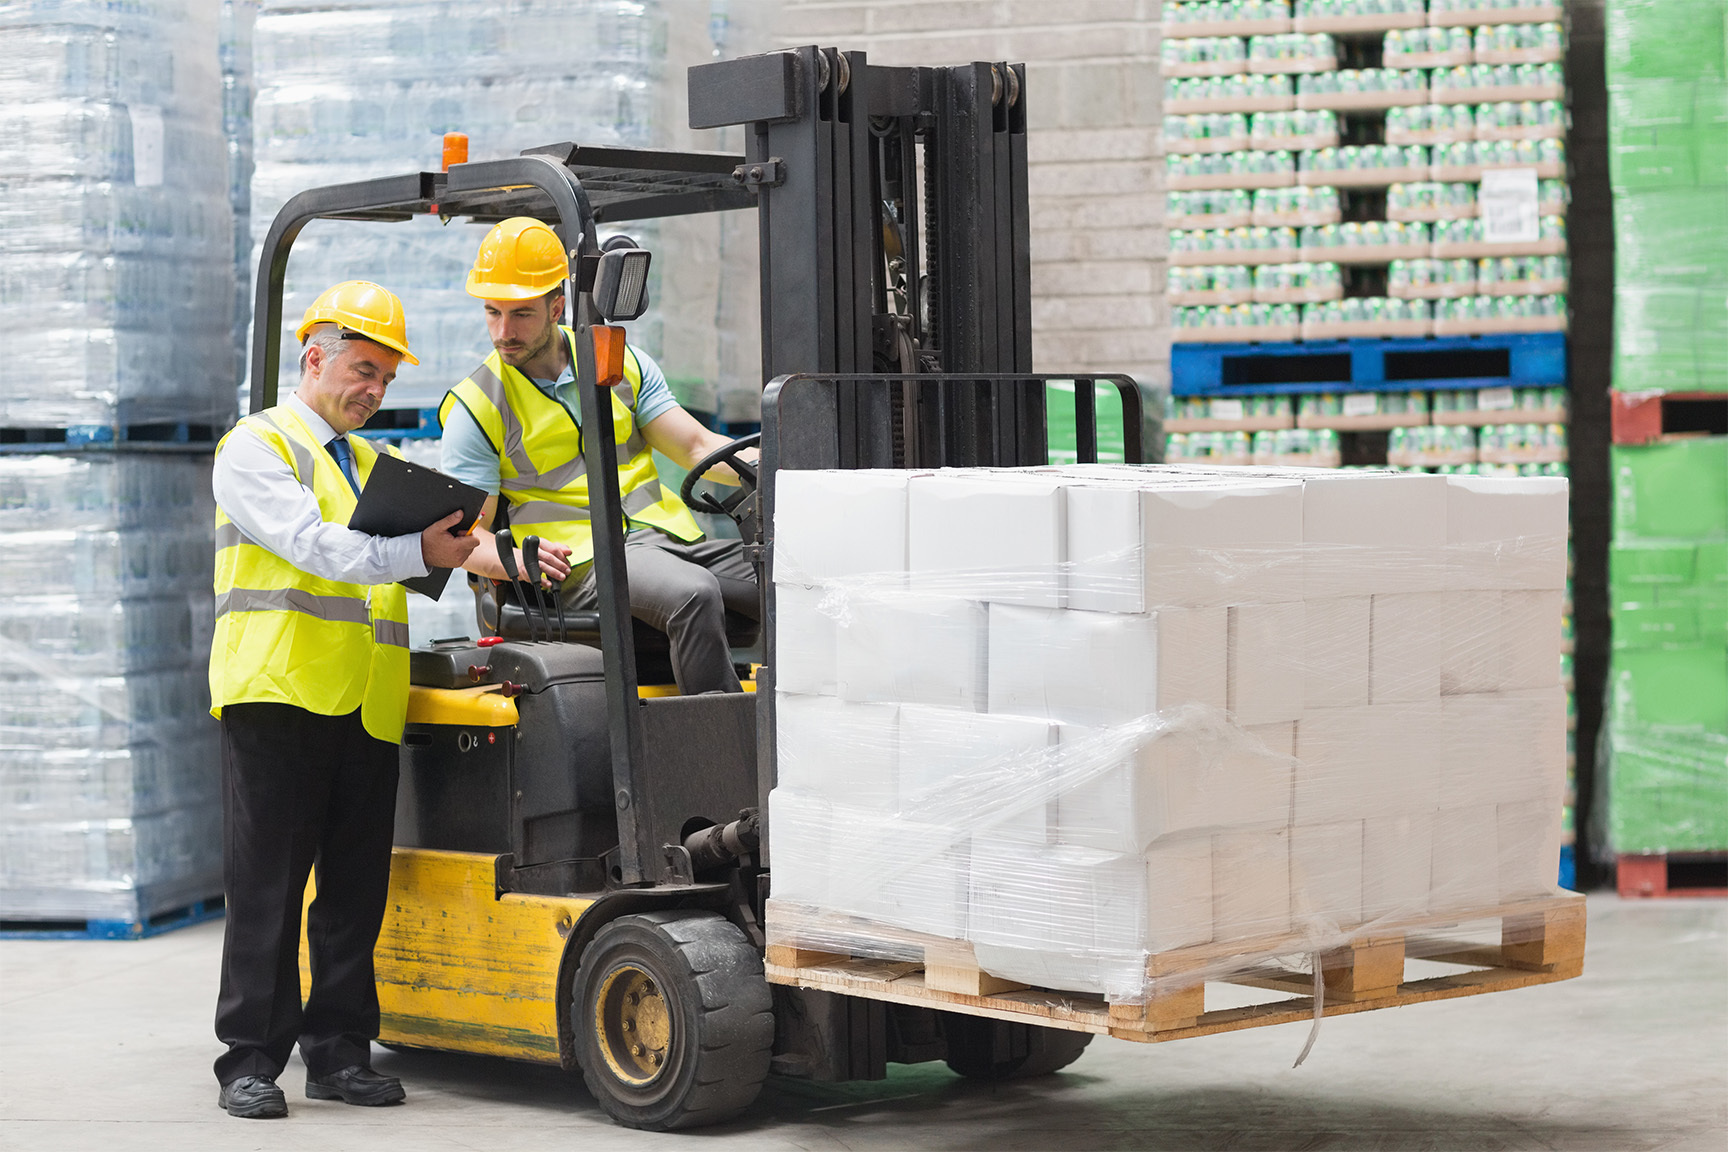 Forklift Driver talking to other warehouse worker while carrying delivery on forklift forks